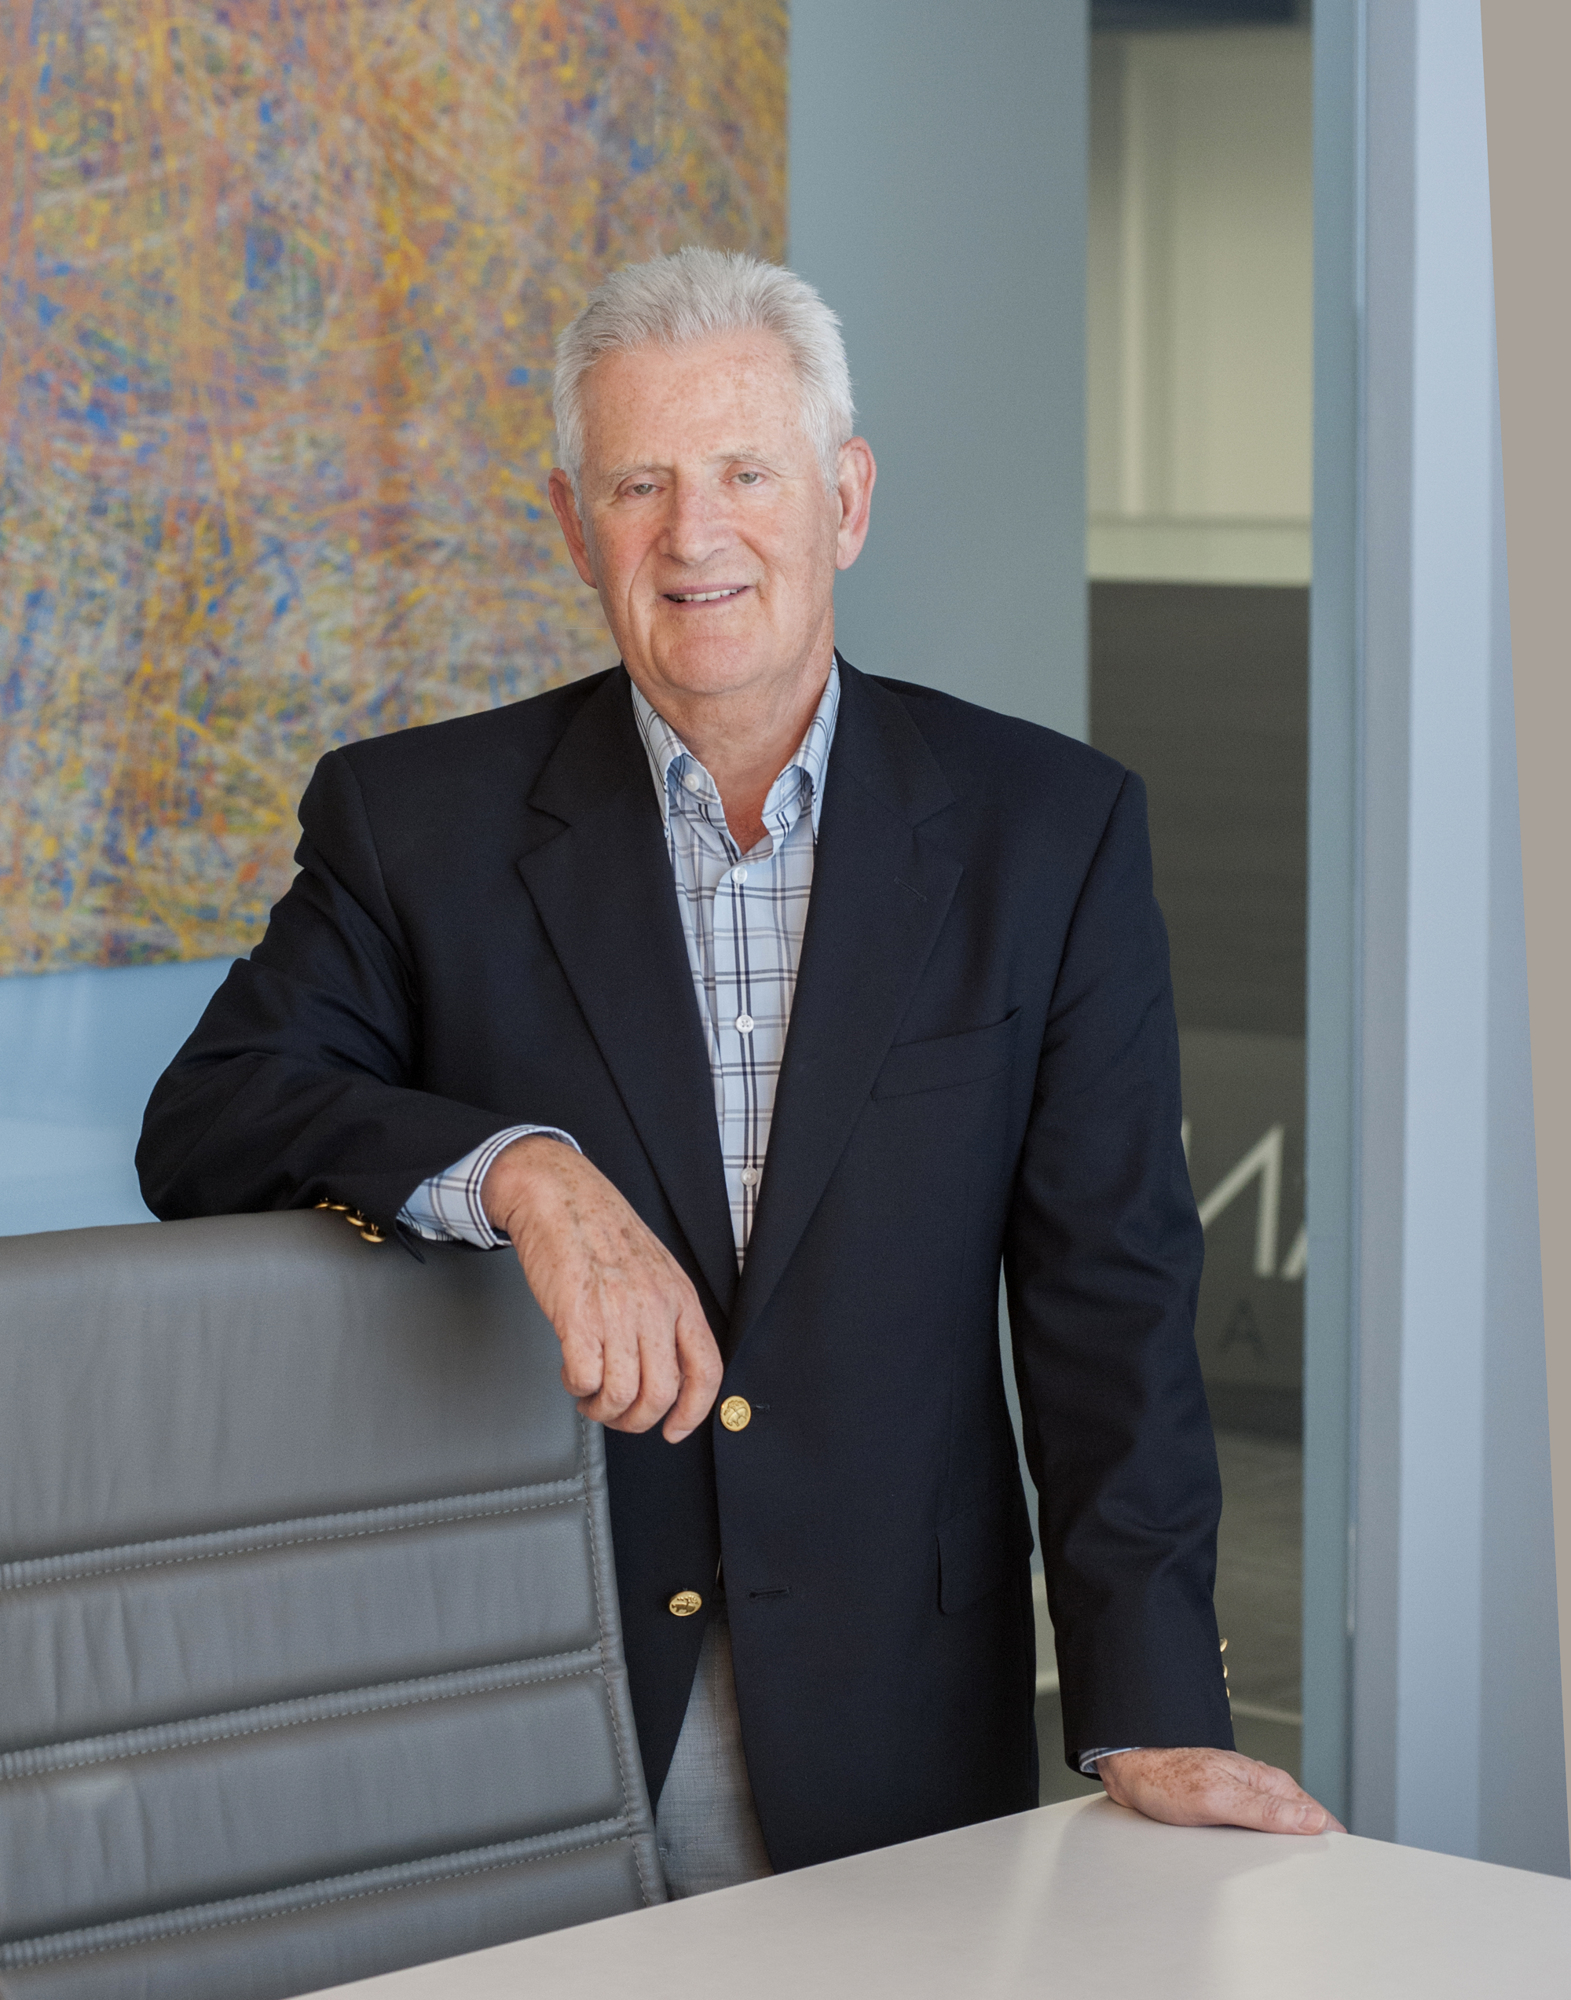 COURTESY PHOTO — Ian Black is the founder and partner of Sarasota-based commercial real estate brokerage Ian Black Real Estate.